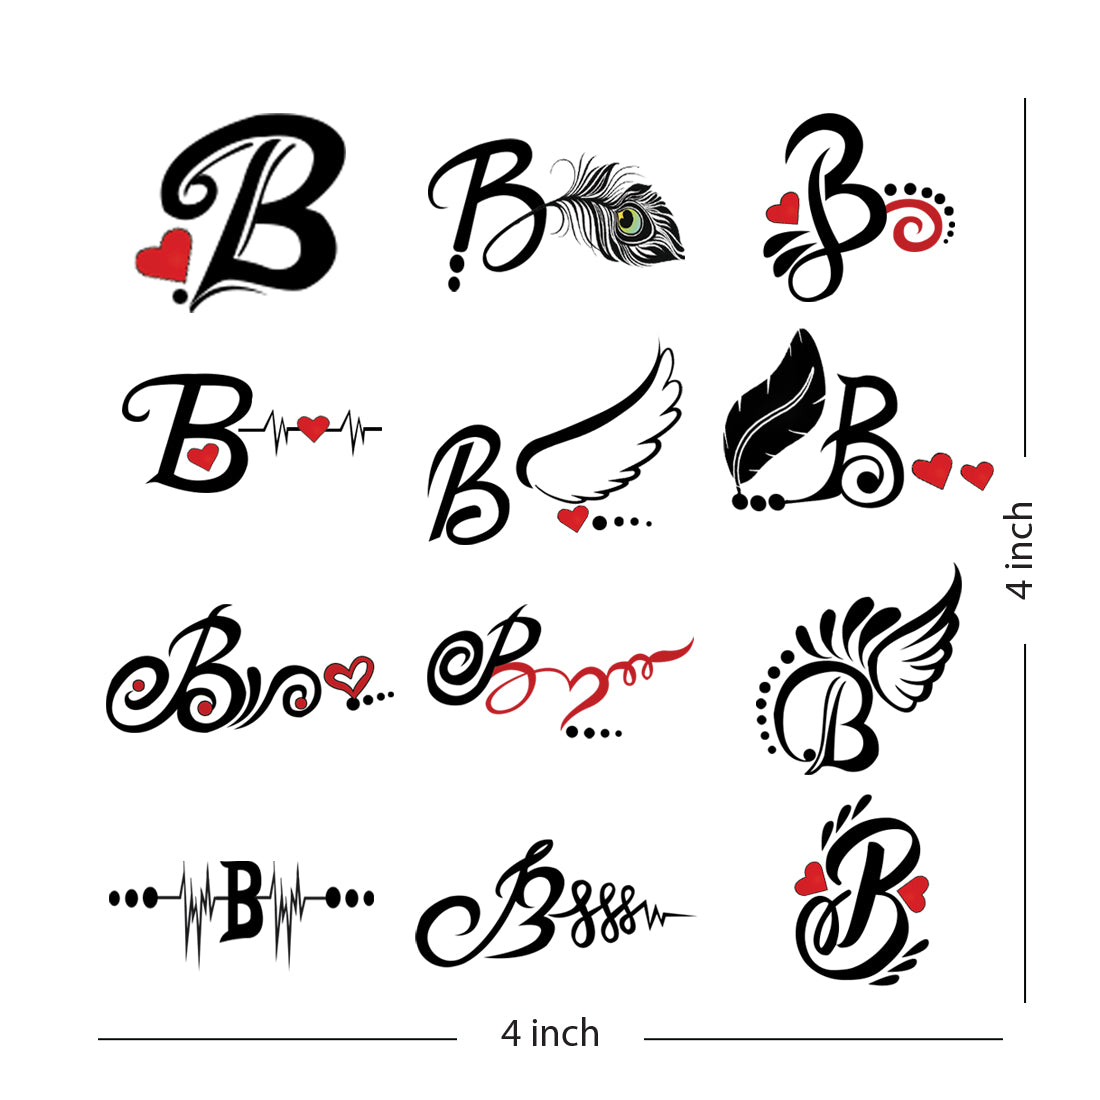 70 Letter B Tattoo Designs Ideas and Templates  Tattoo Me Now  Letter b  tattoo B tattoo Trendy tattoos